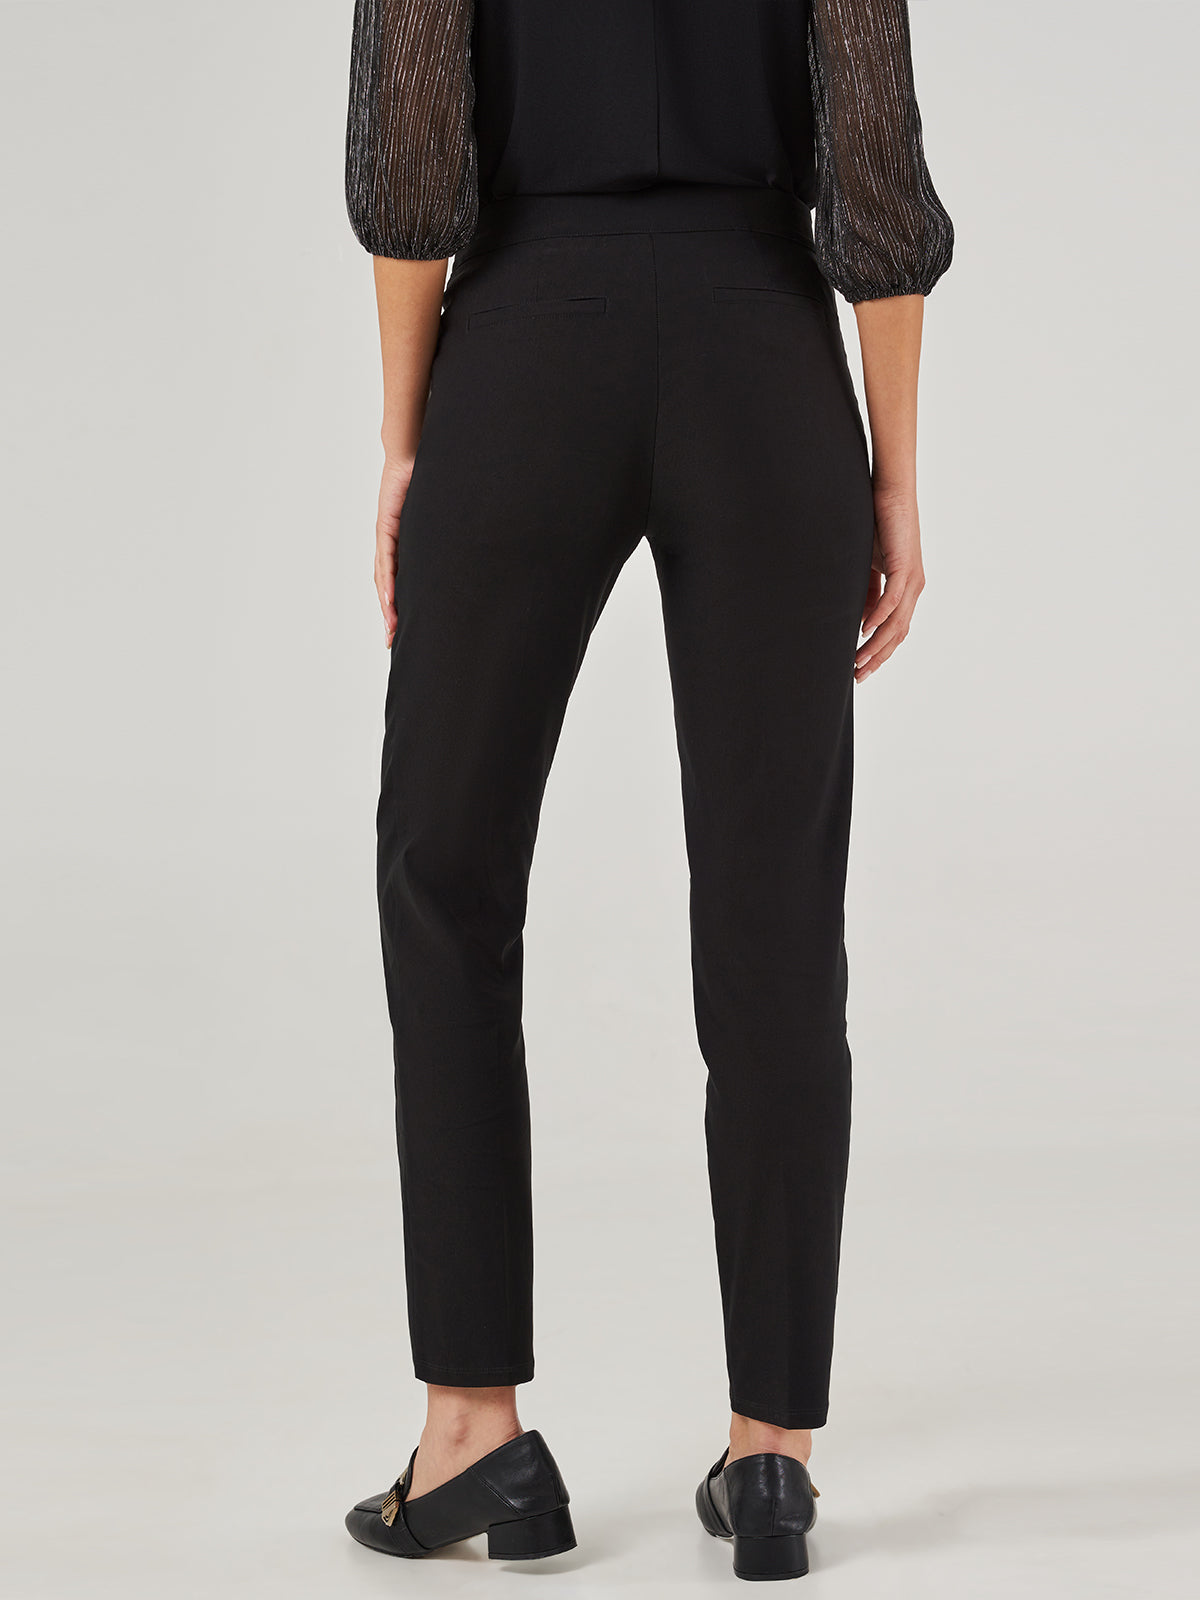 89th + Madison Luxe Stretch Millennium Straight Pants